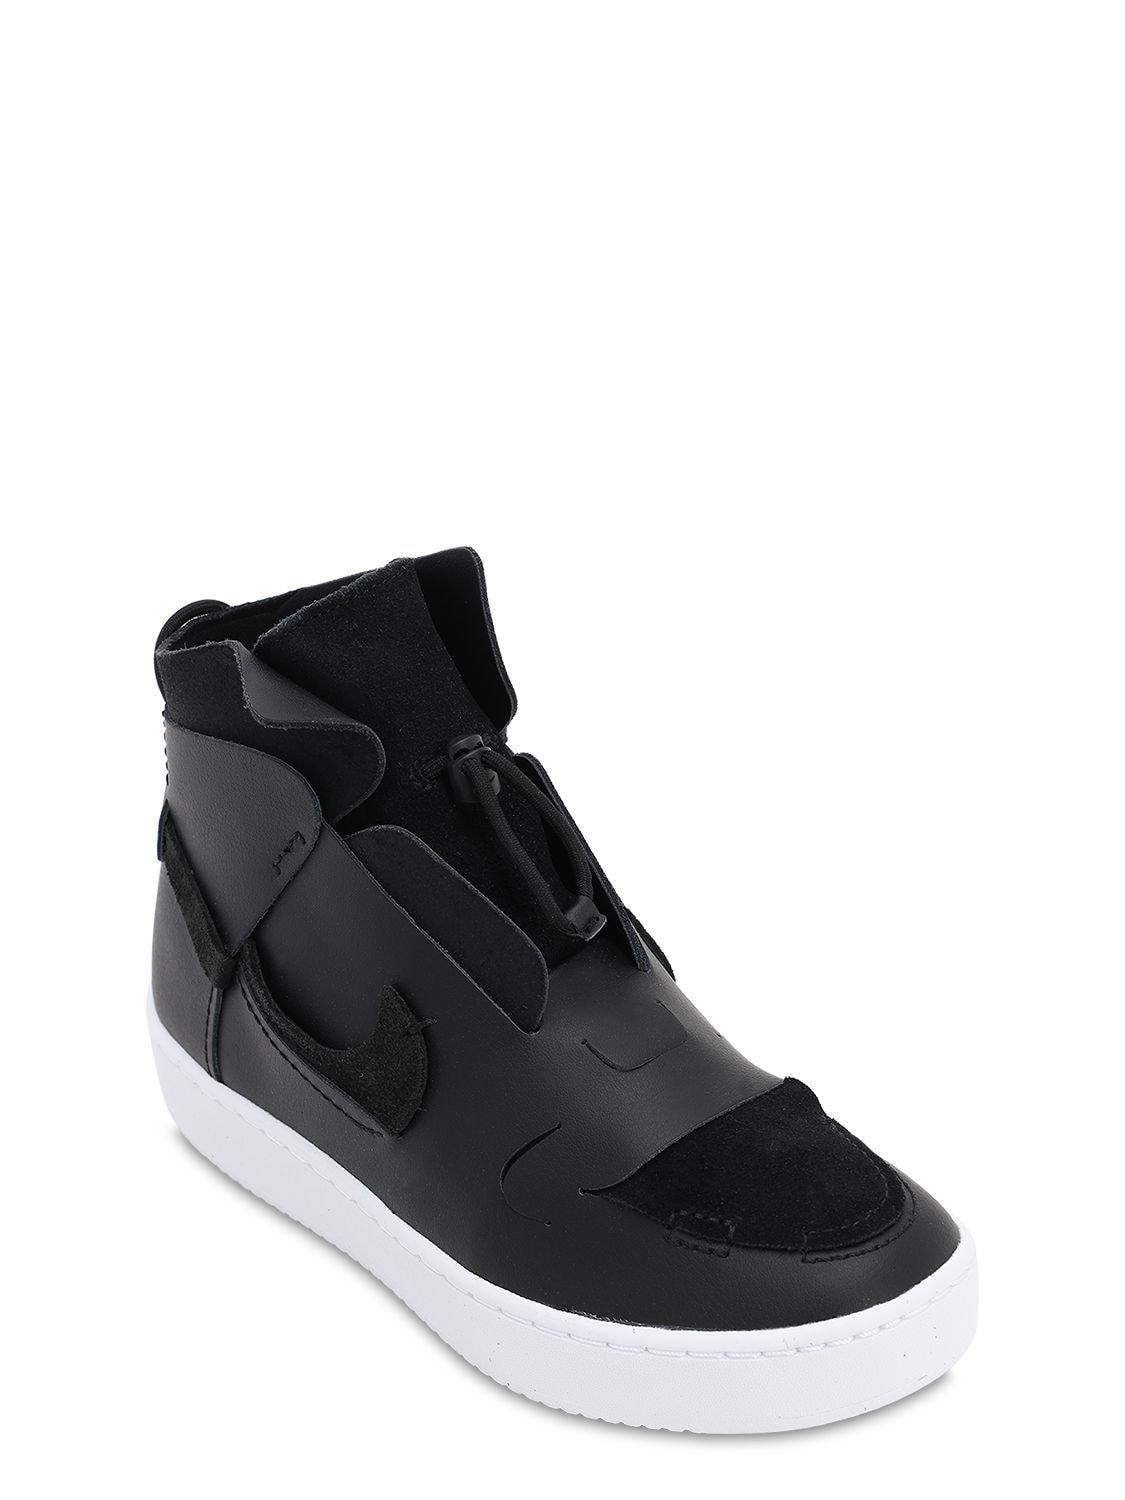 Nike Leather Vandalized Lx Sneakers in Black - Lyst